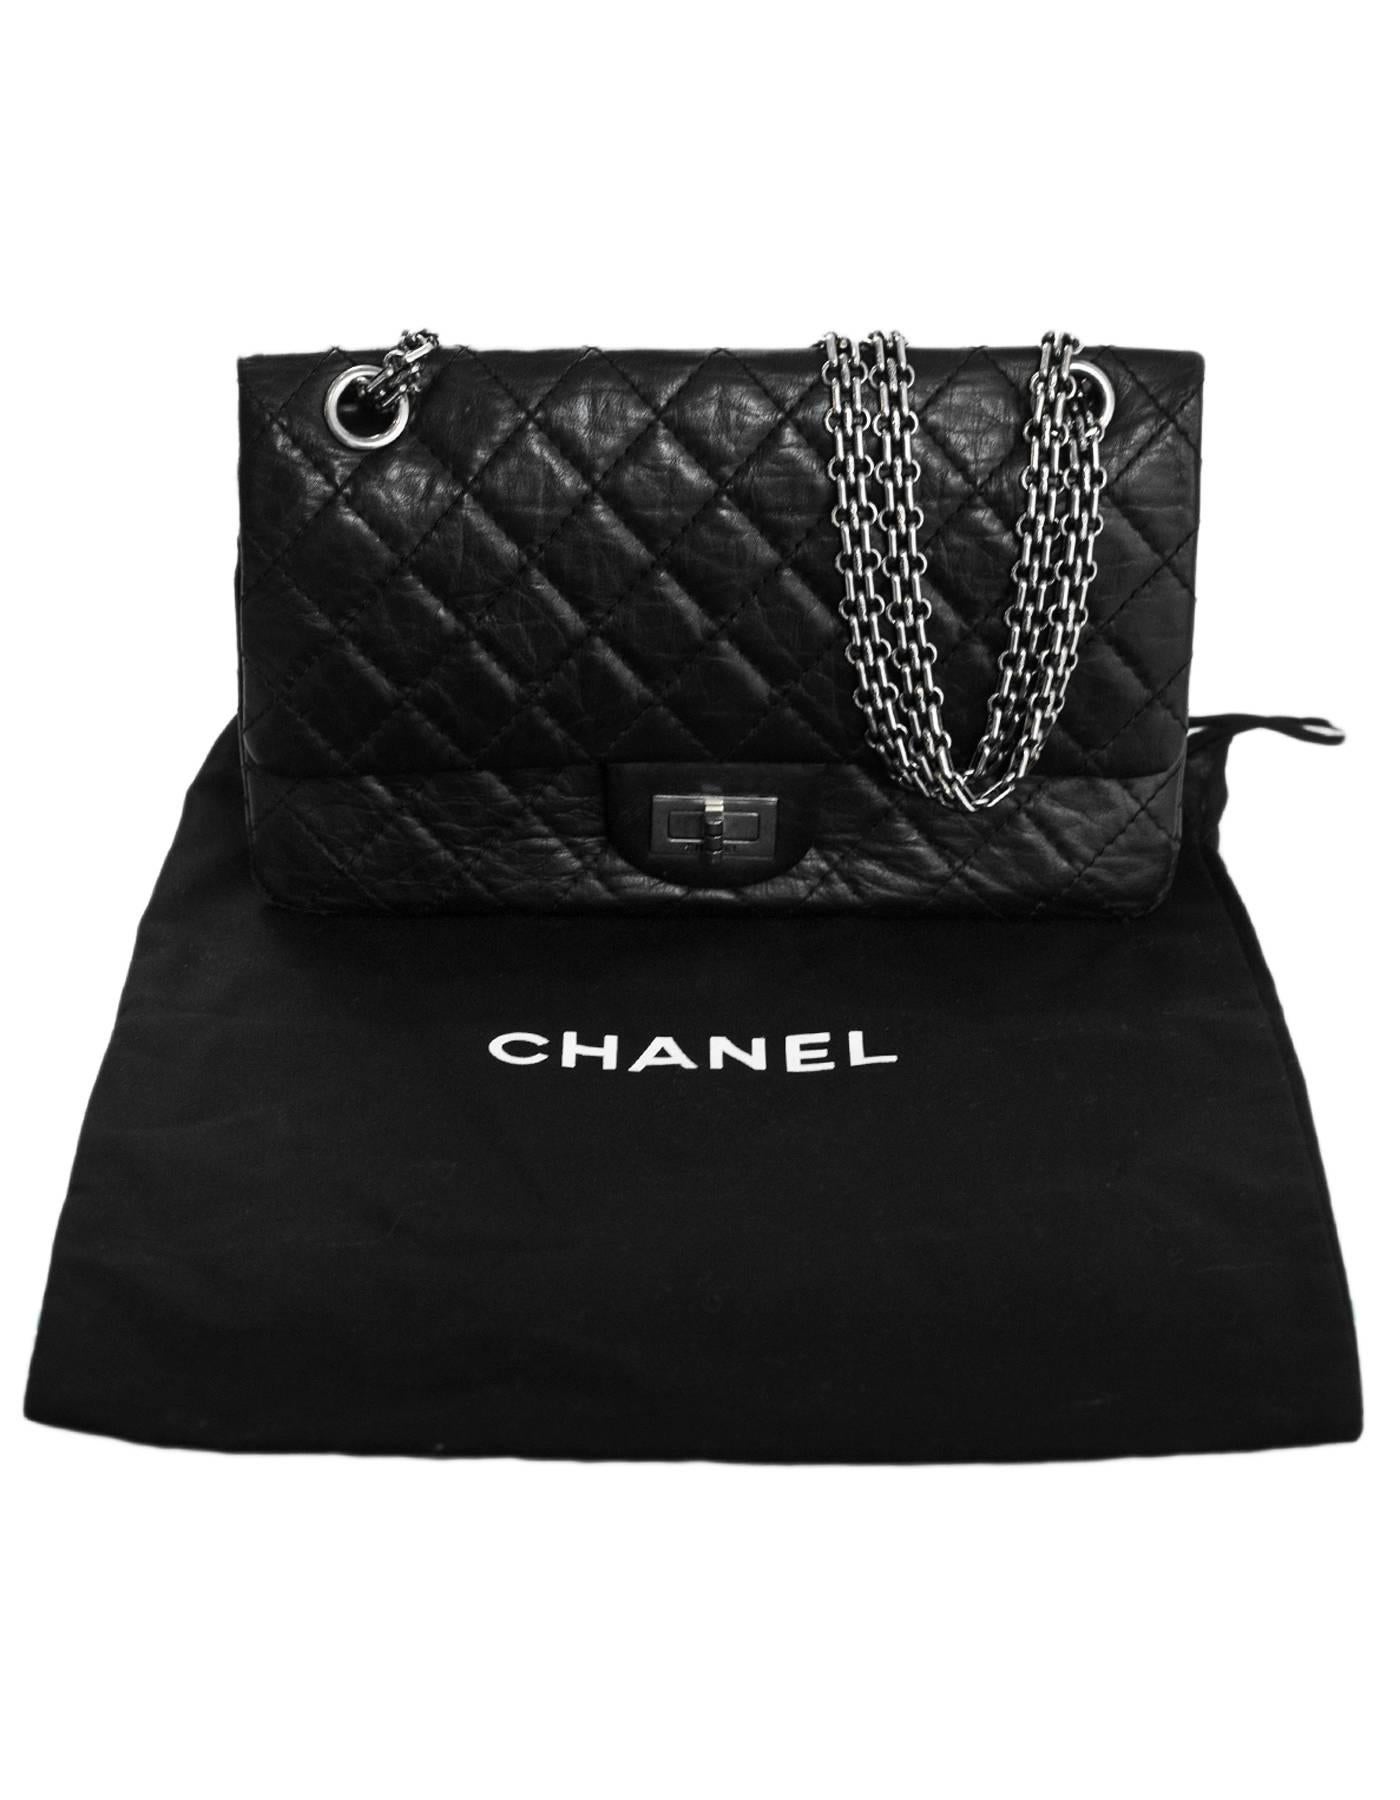 Chanel Black Distressed Calfskin Reissue 2.55 Double Flap Bag with DB 3